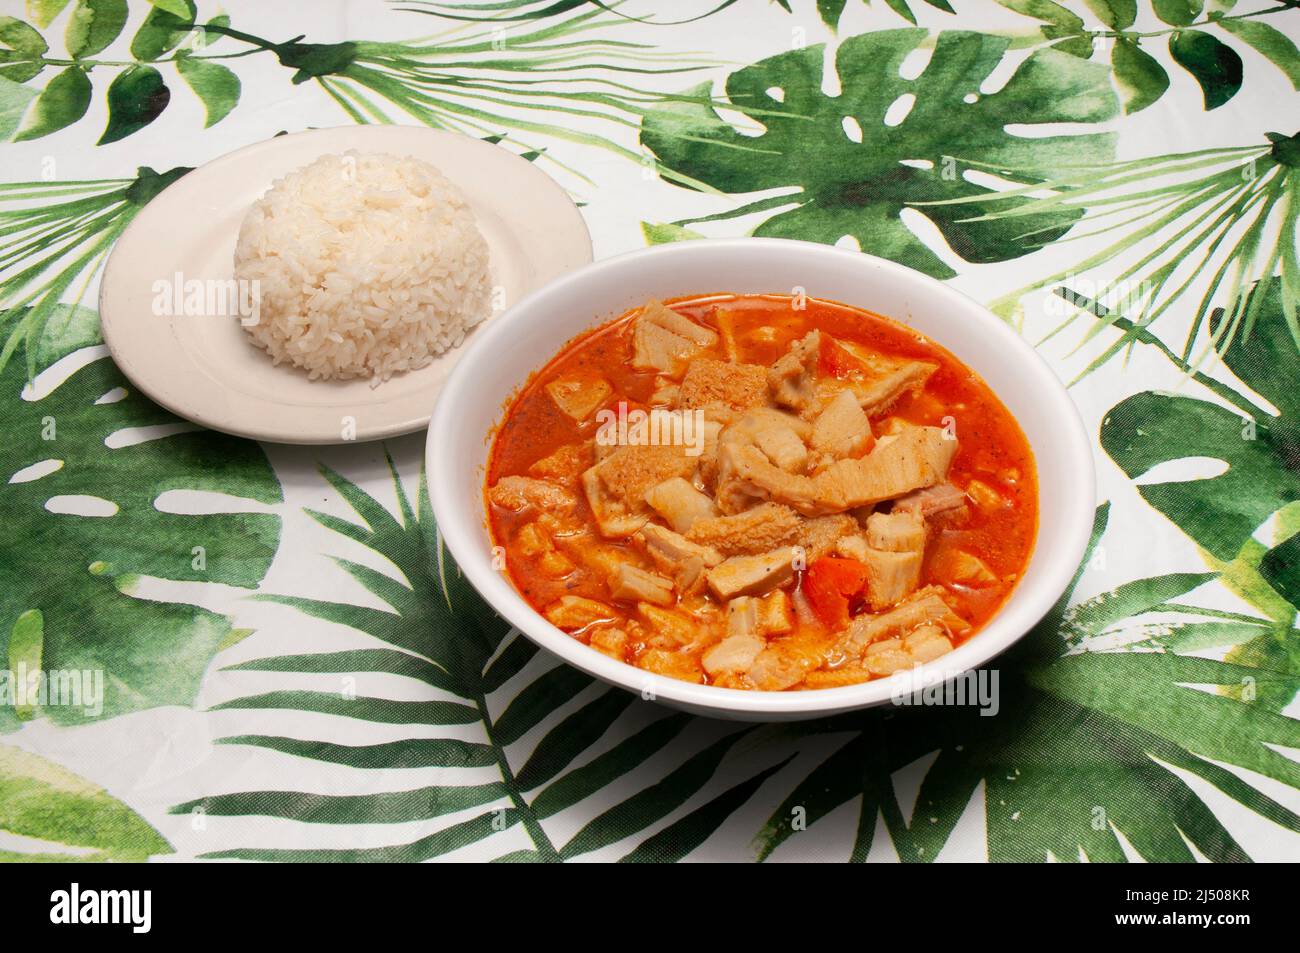 Delicious Mexican dish known as tripe soup Stock Photo